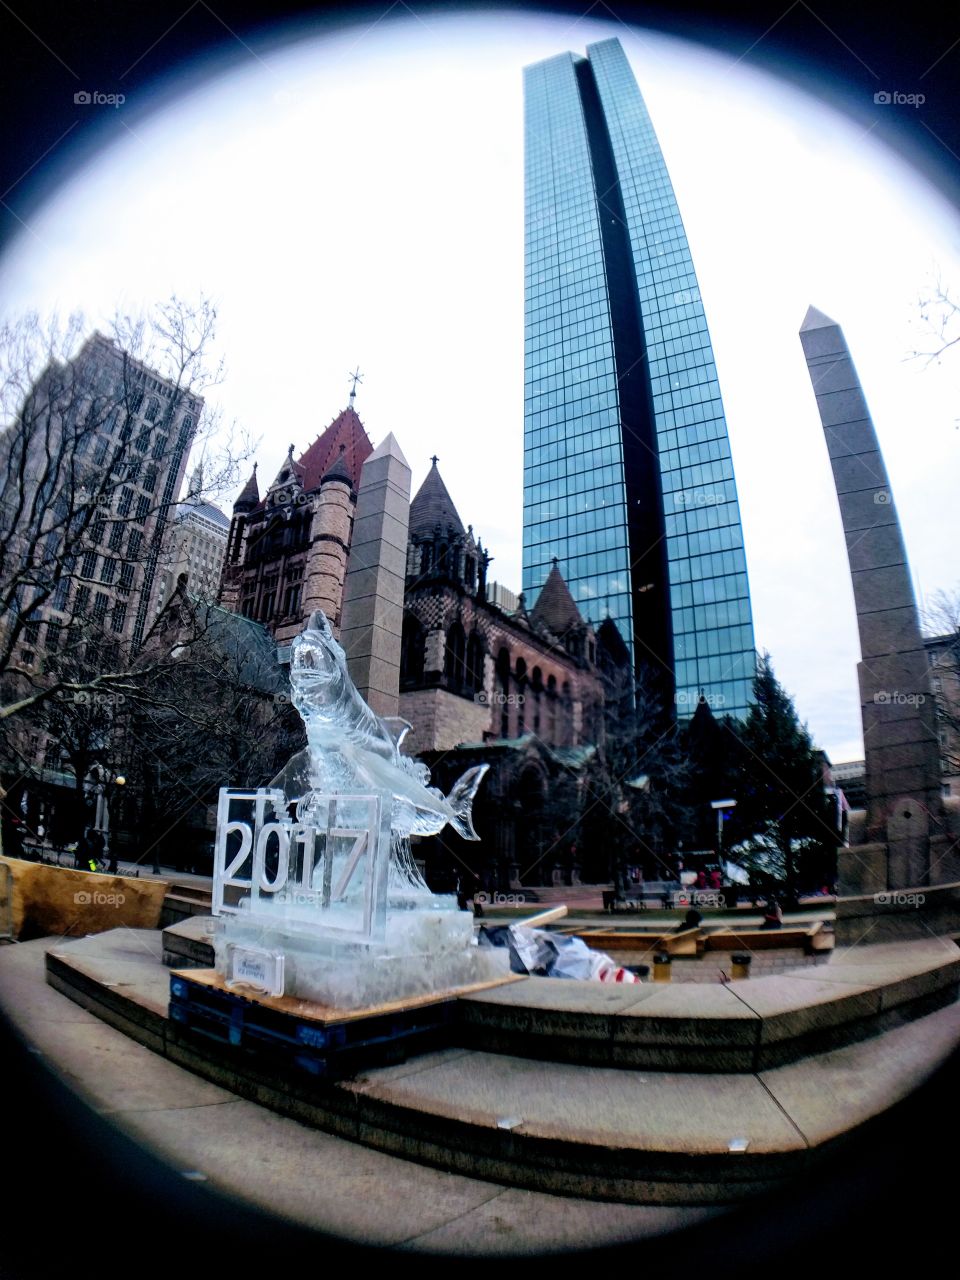 Ice Shark attack on Copley Square